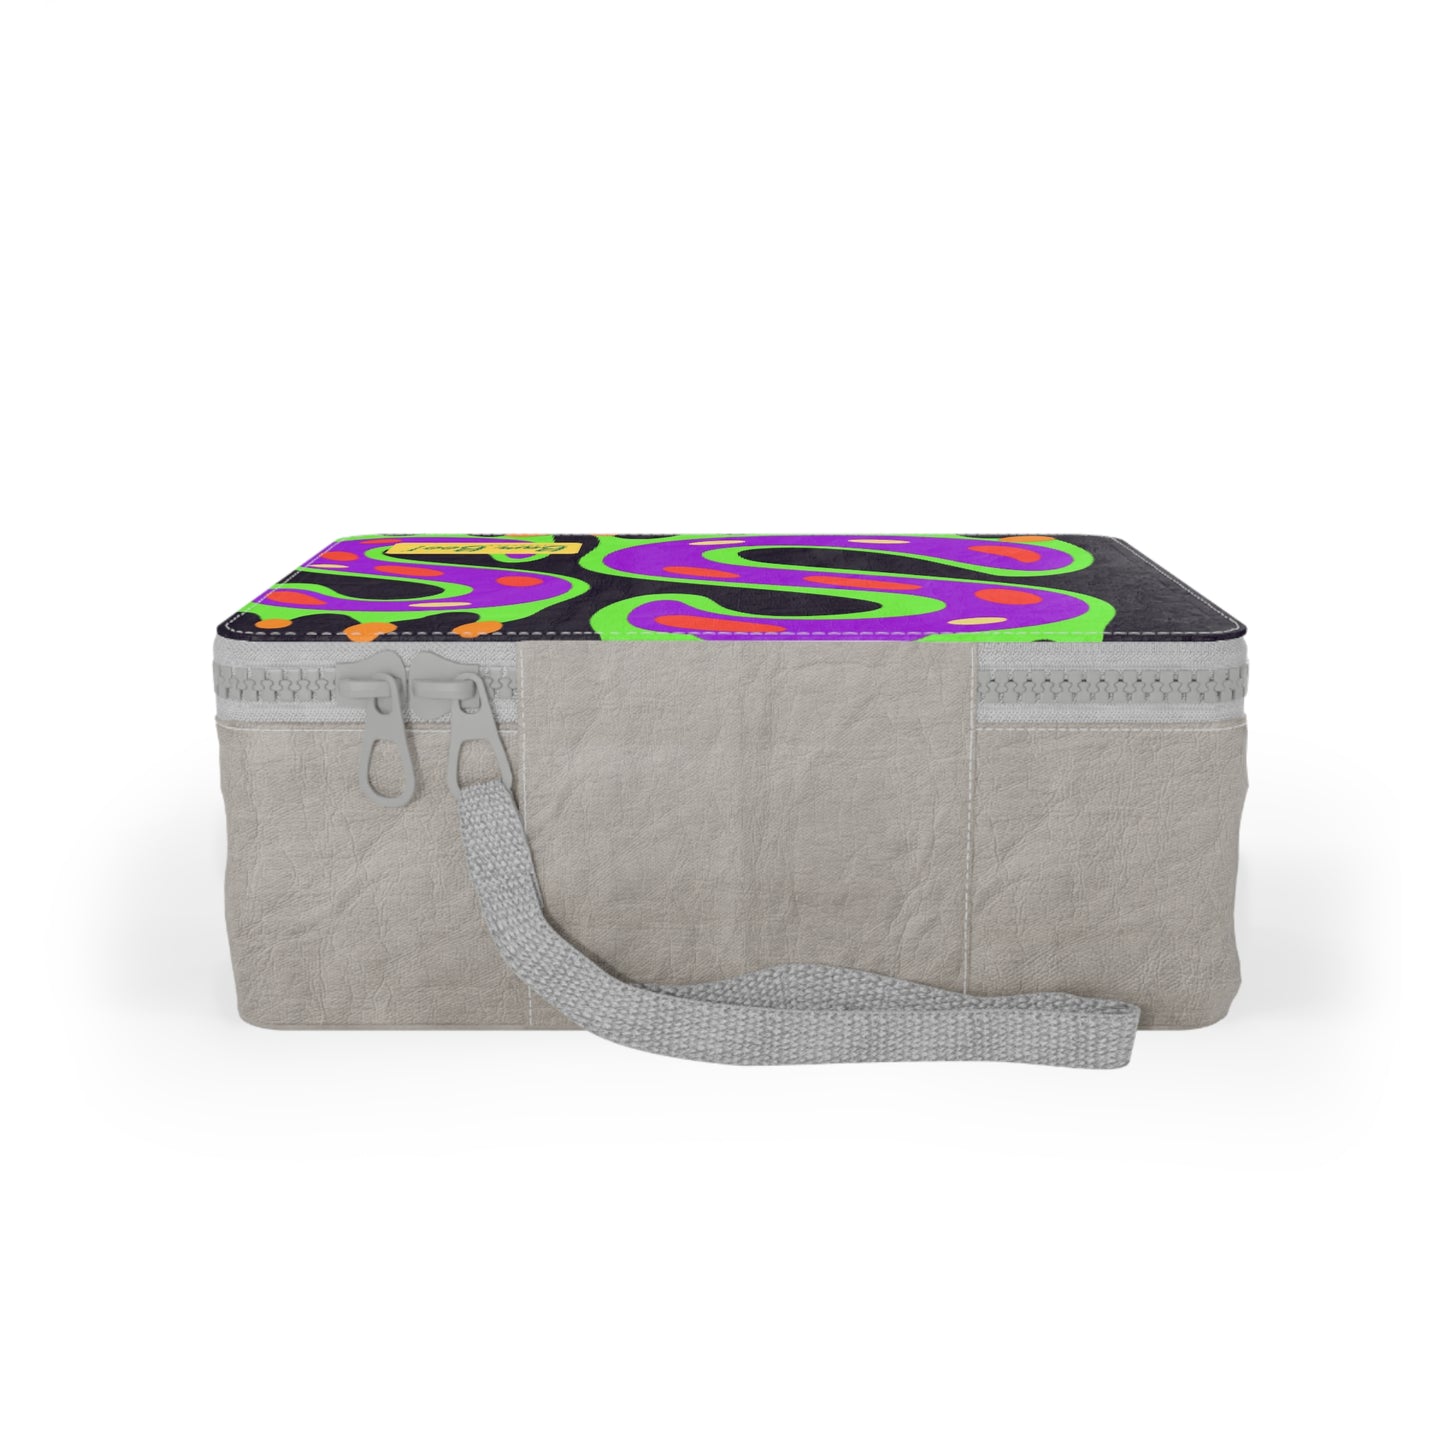 "The Swirling Spectrum of 'S' Shapes" - Bam Boo! Lifestyle Eco-friendly Paper Lunch Bag